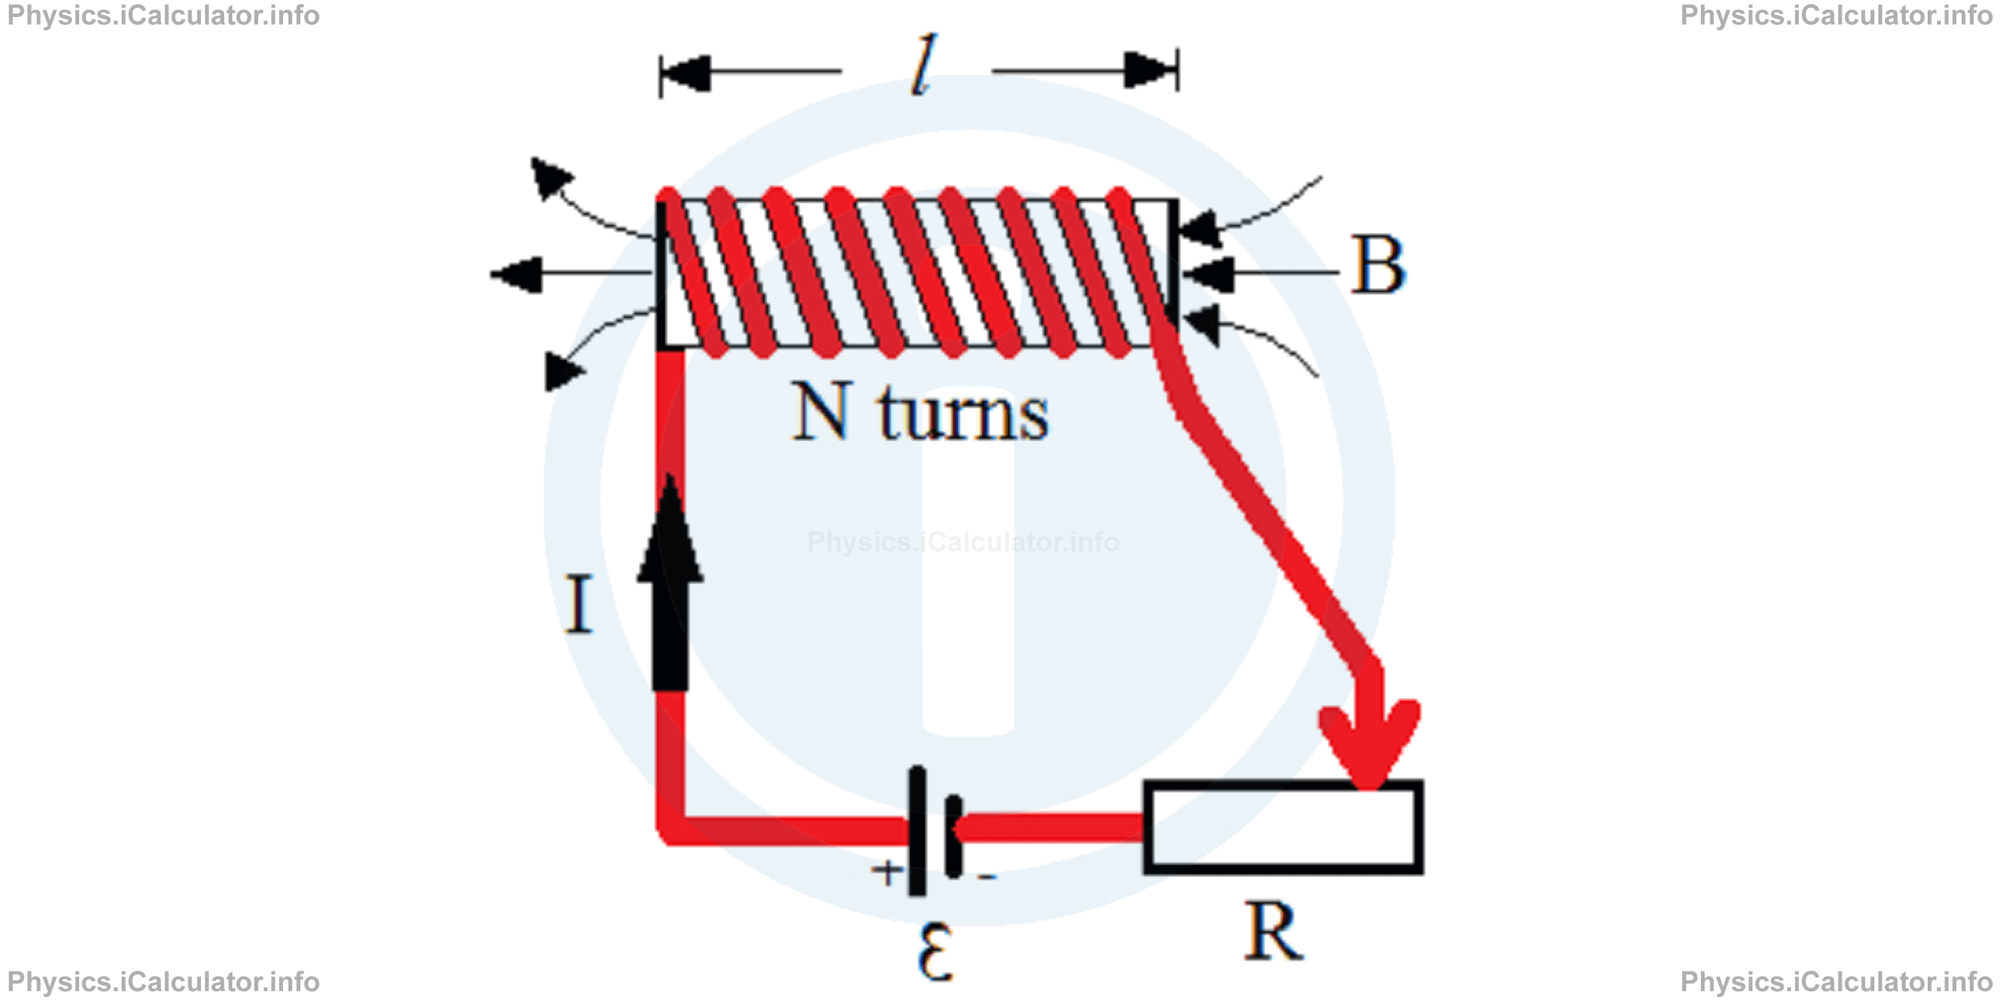 Physics Tutorials: This image provides visual information for the physics tutorial Inductance and Self-Induction 